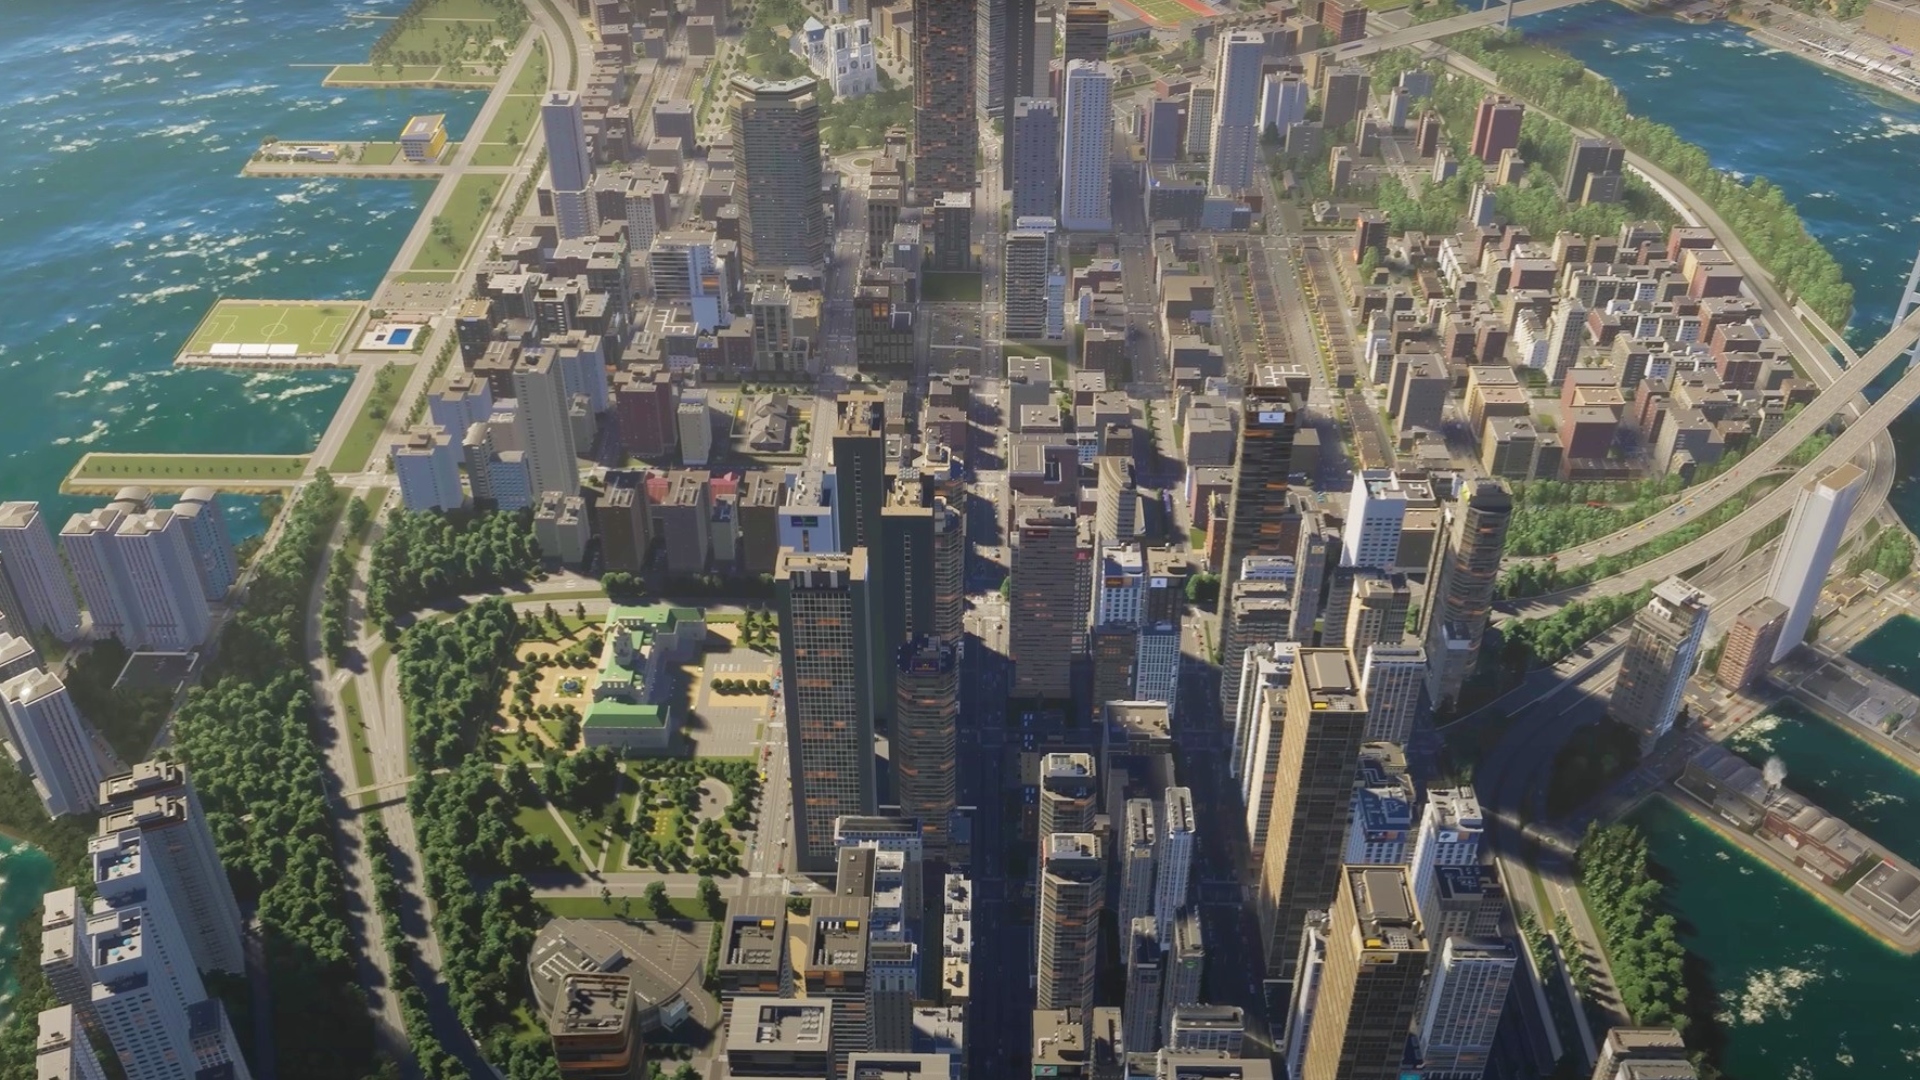 Cities Skylines 2 preload is actually possible, Paradox says